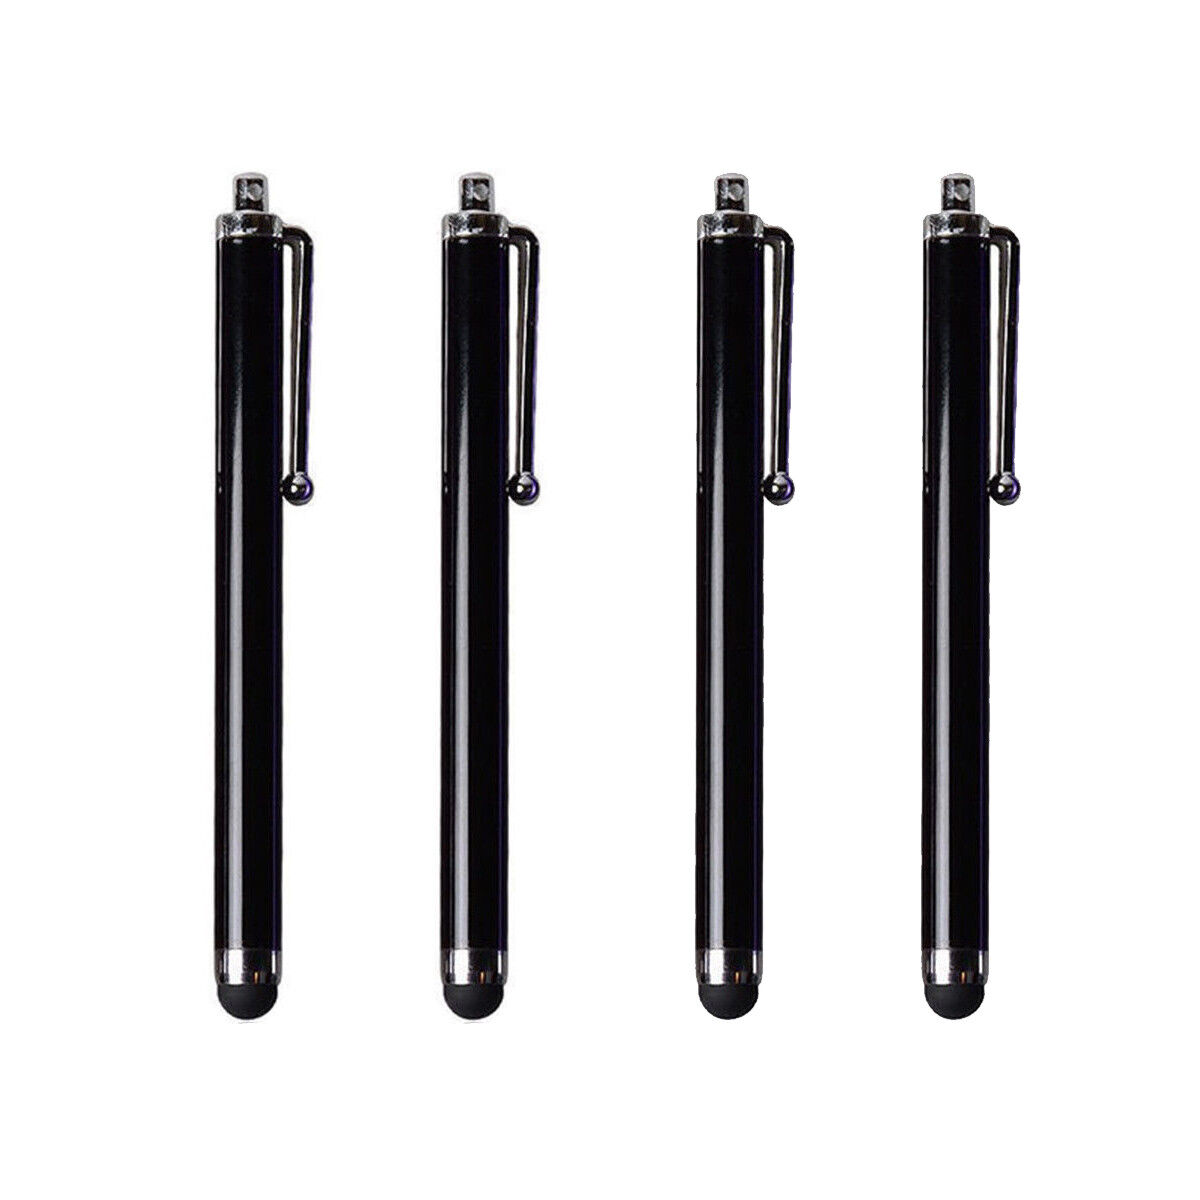 4X Universal Touch Screen Stylus Pens for IPad IPod IPhone Tablet Smartphone PC